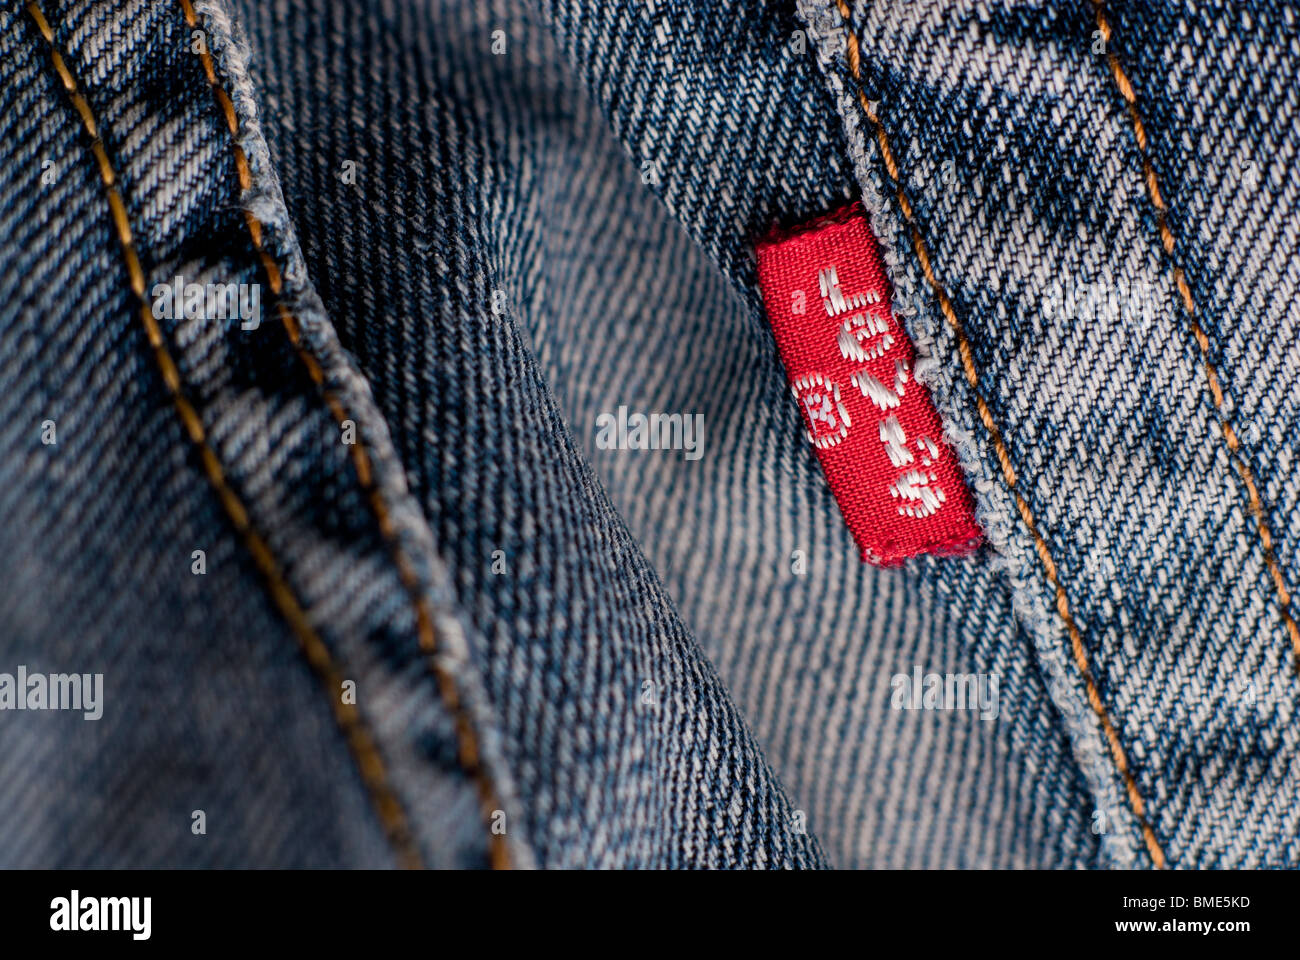 Levis tab stock photography and images - Alamy